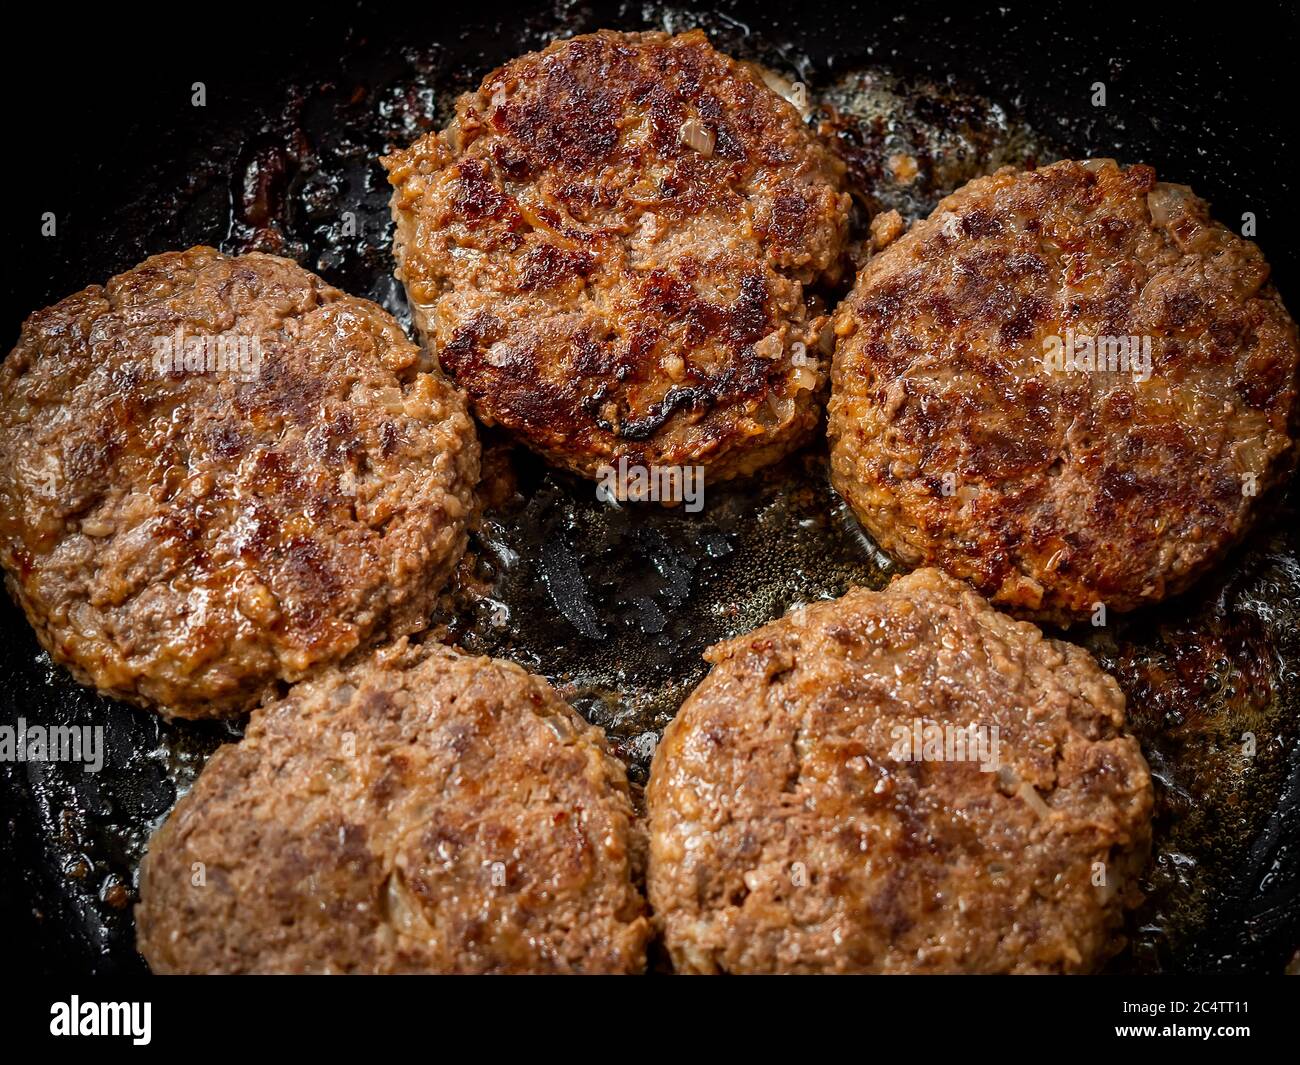 Beef burgers fried in frying pan. Close-up homemade juicy minced meat patties burgers in iron frying pan top view. Stock Photo